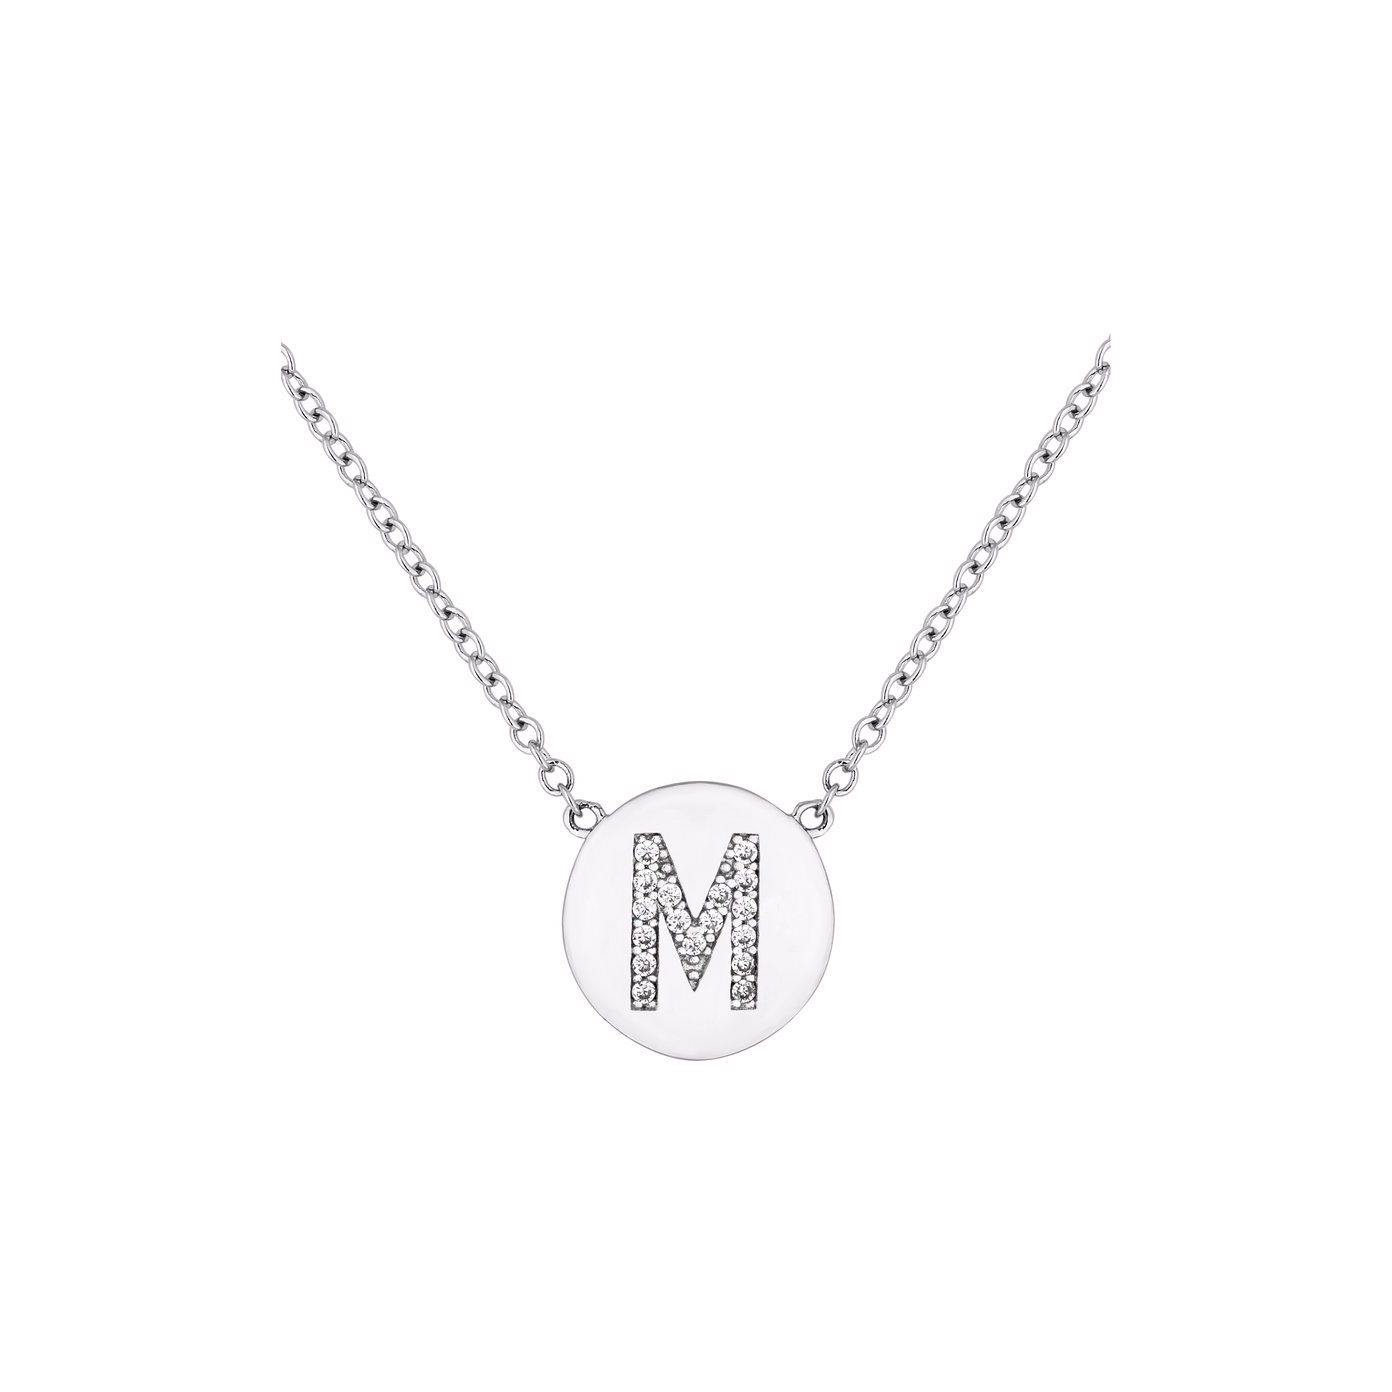 Custom engraved pendant OEM/ODM Jewelry in white gold OEM fine jewelry suppliers